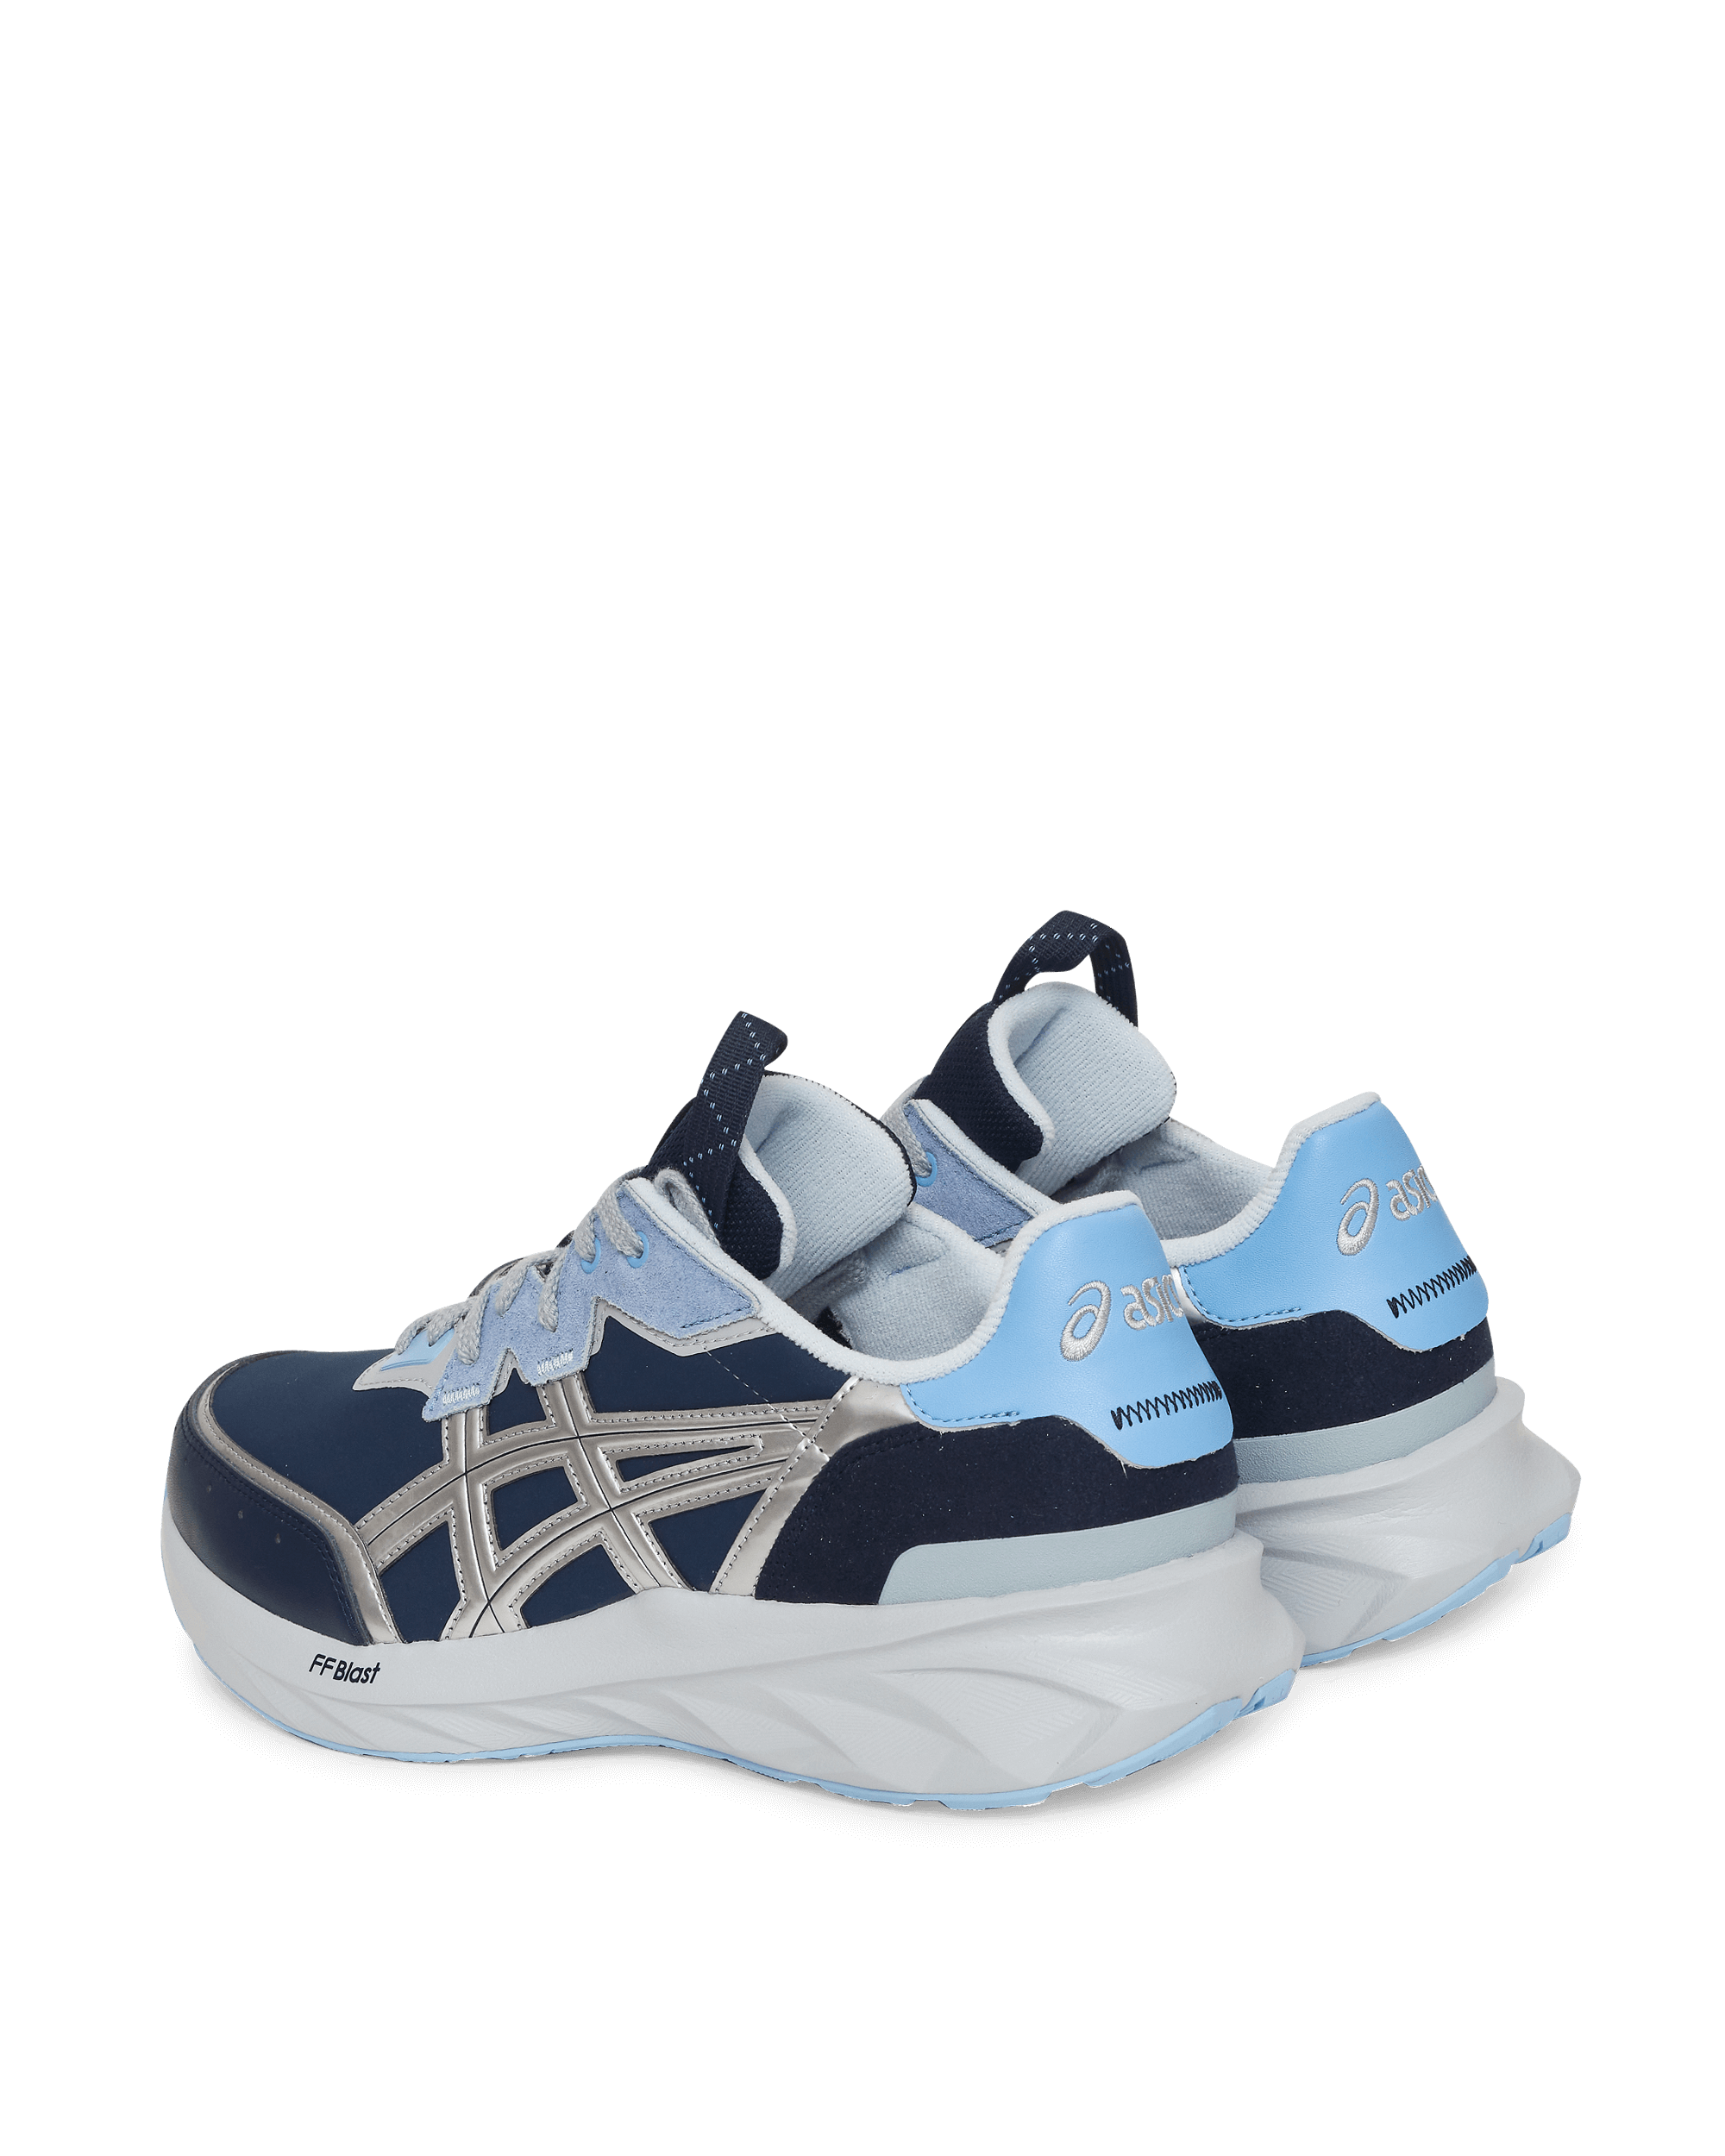 Asics Hs1-S Tarther Blast Midnight/Pure Silver Sneakers Low 1201A190-400